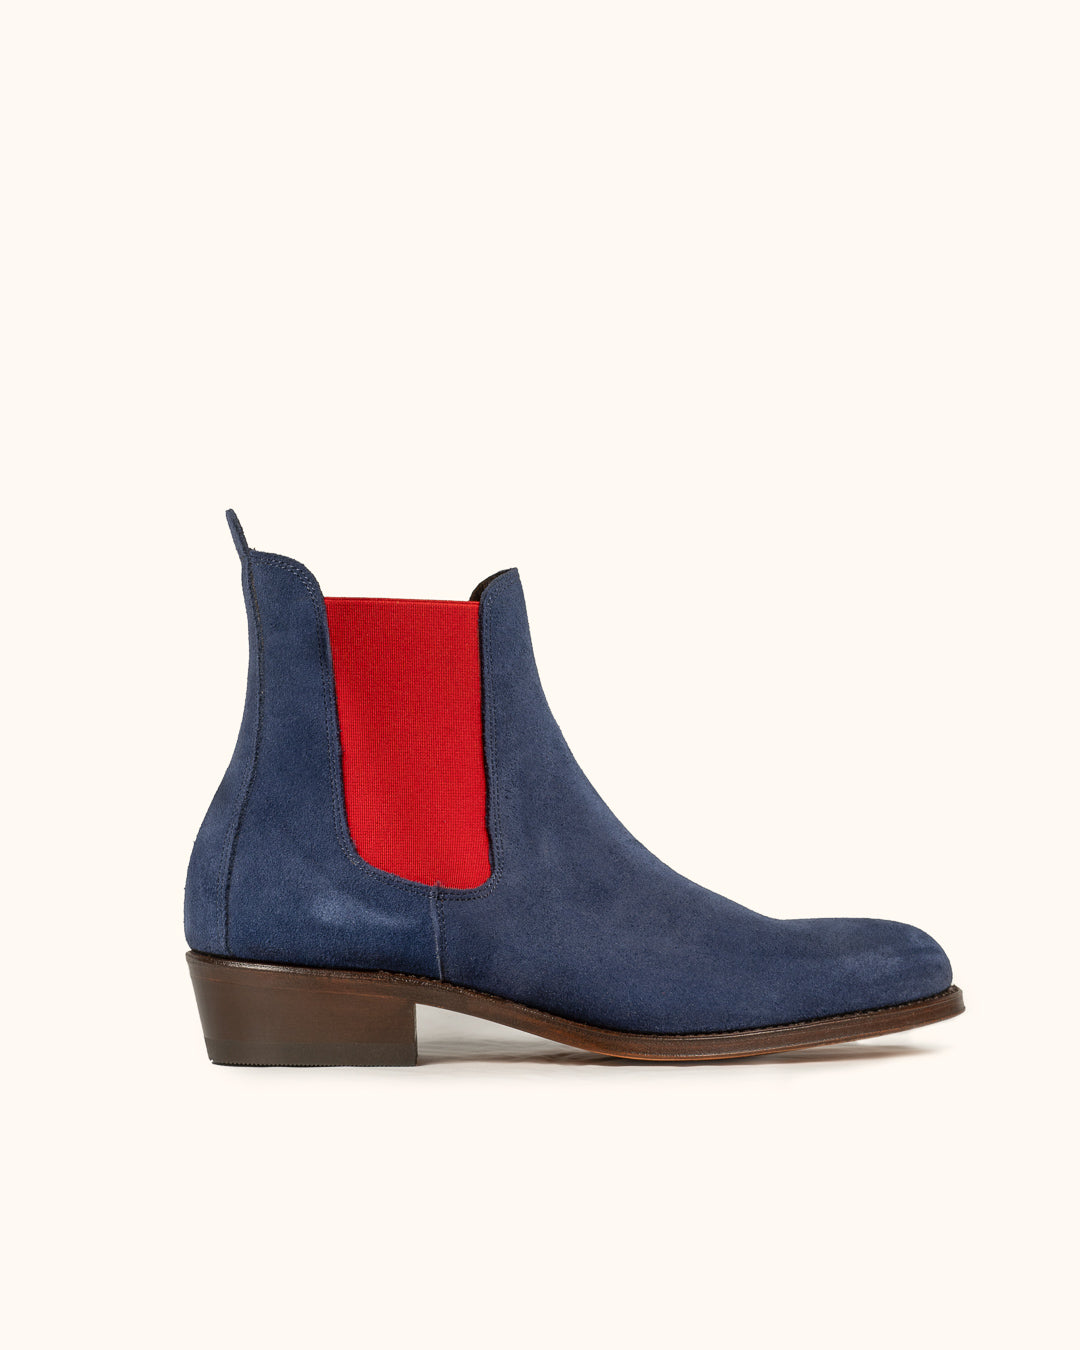 Chelsea Suede Boot - Navy and Red